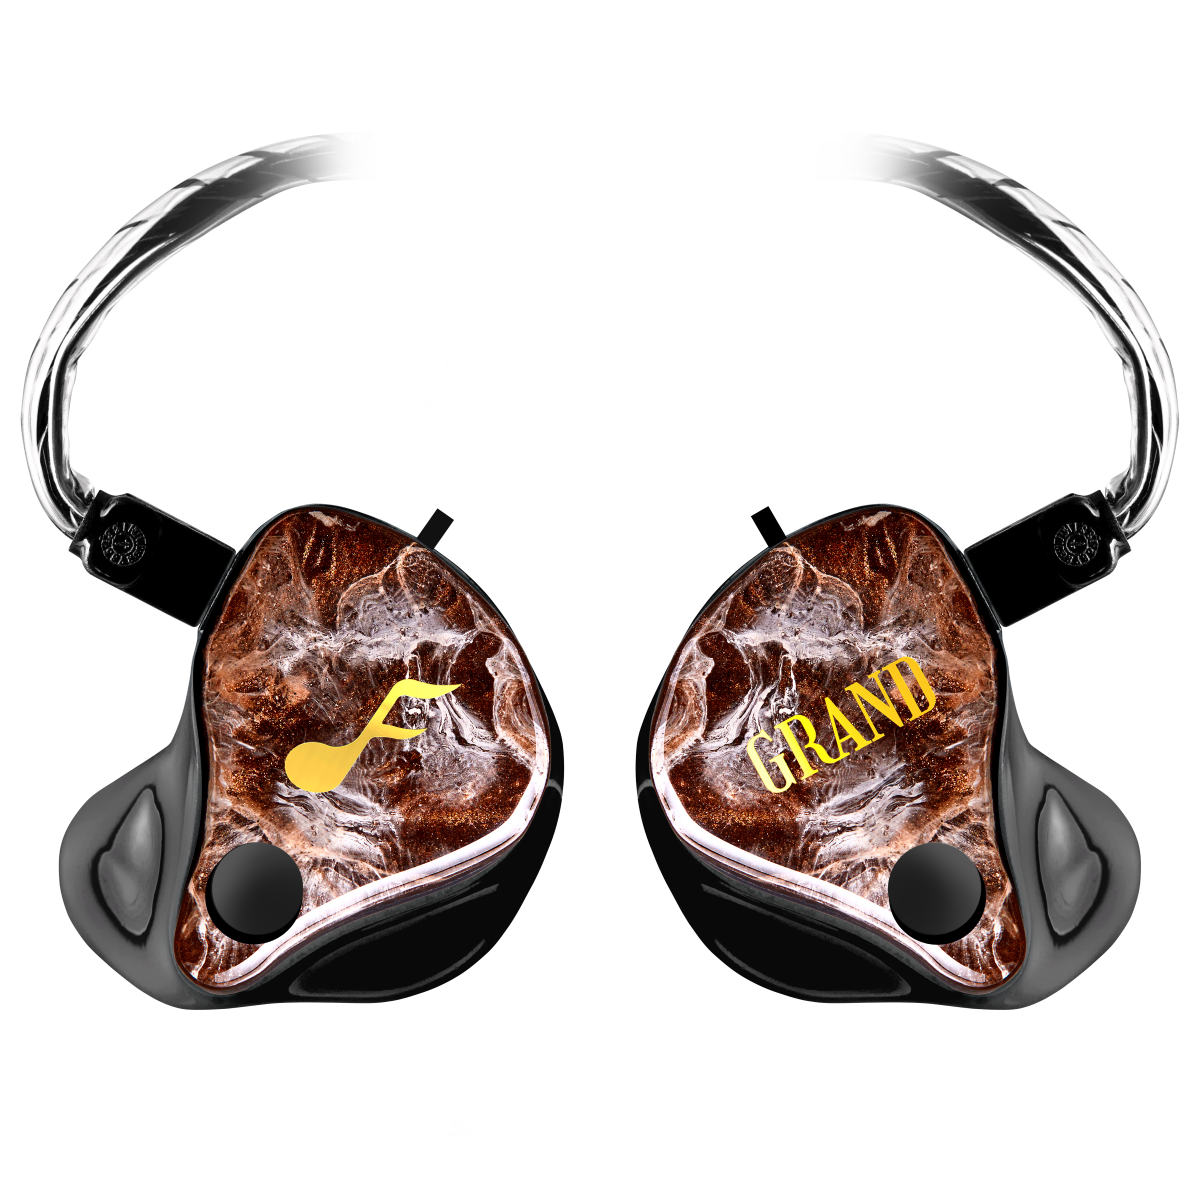 GRAND Maestro Custom IEM - Prices from 4916.00 to 5010.00